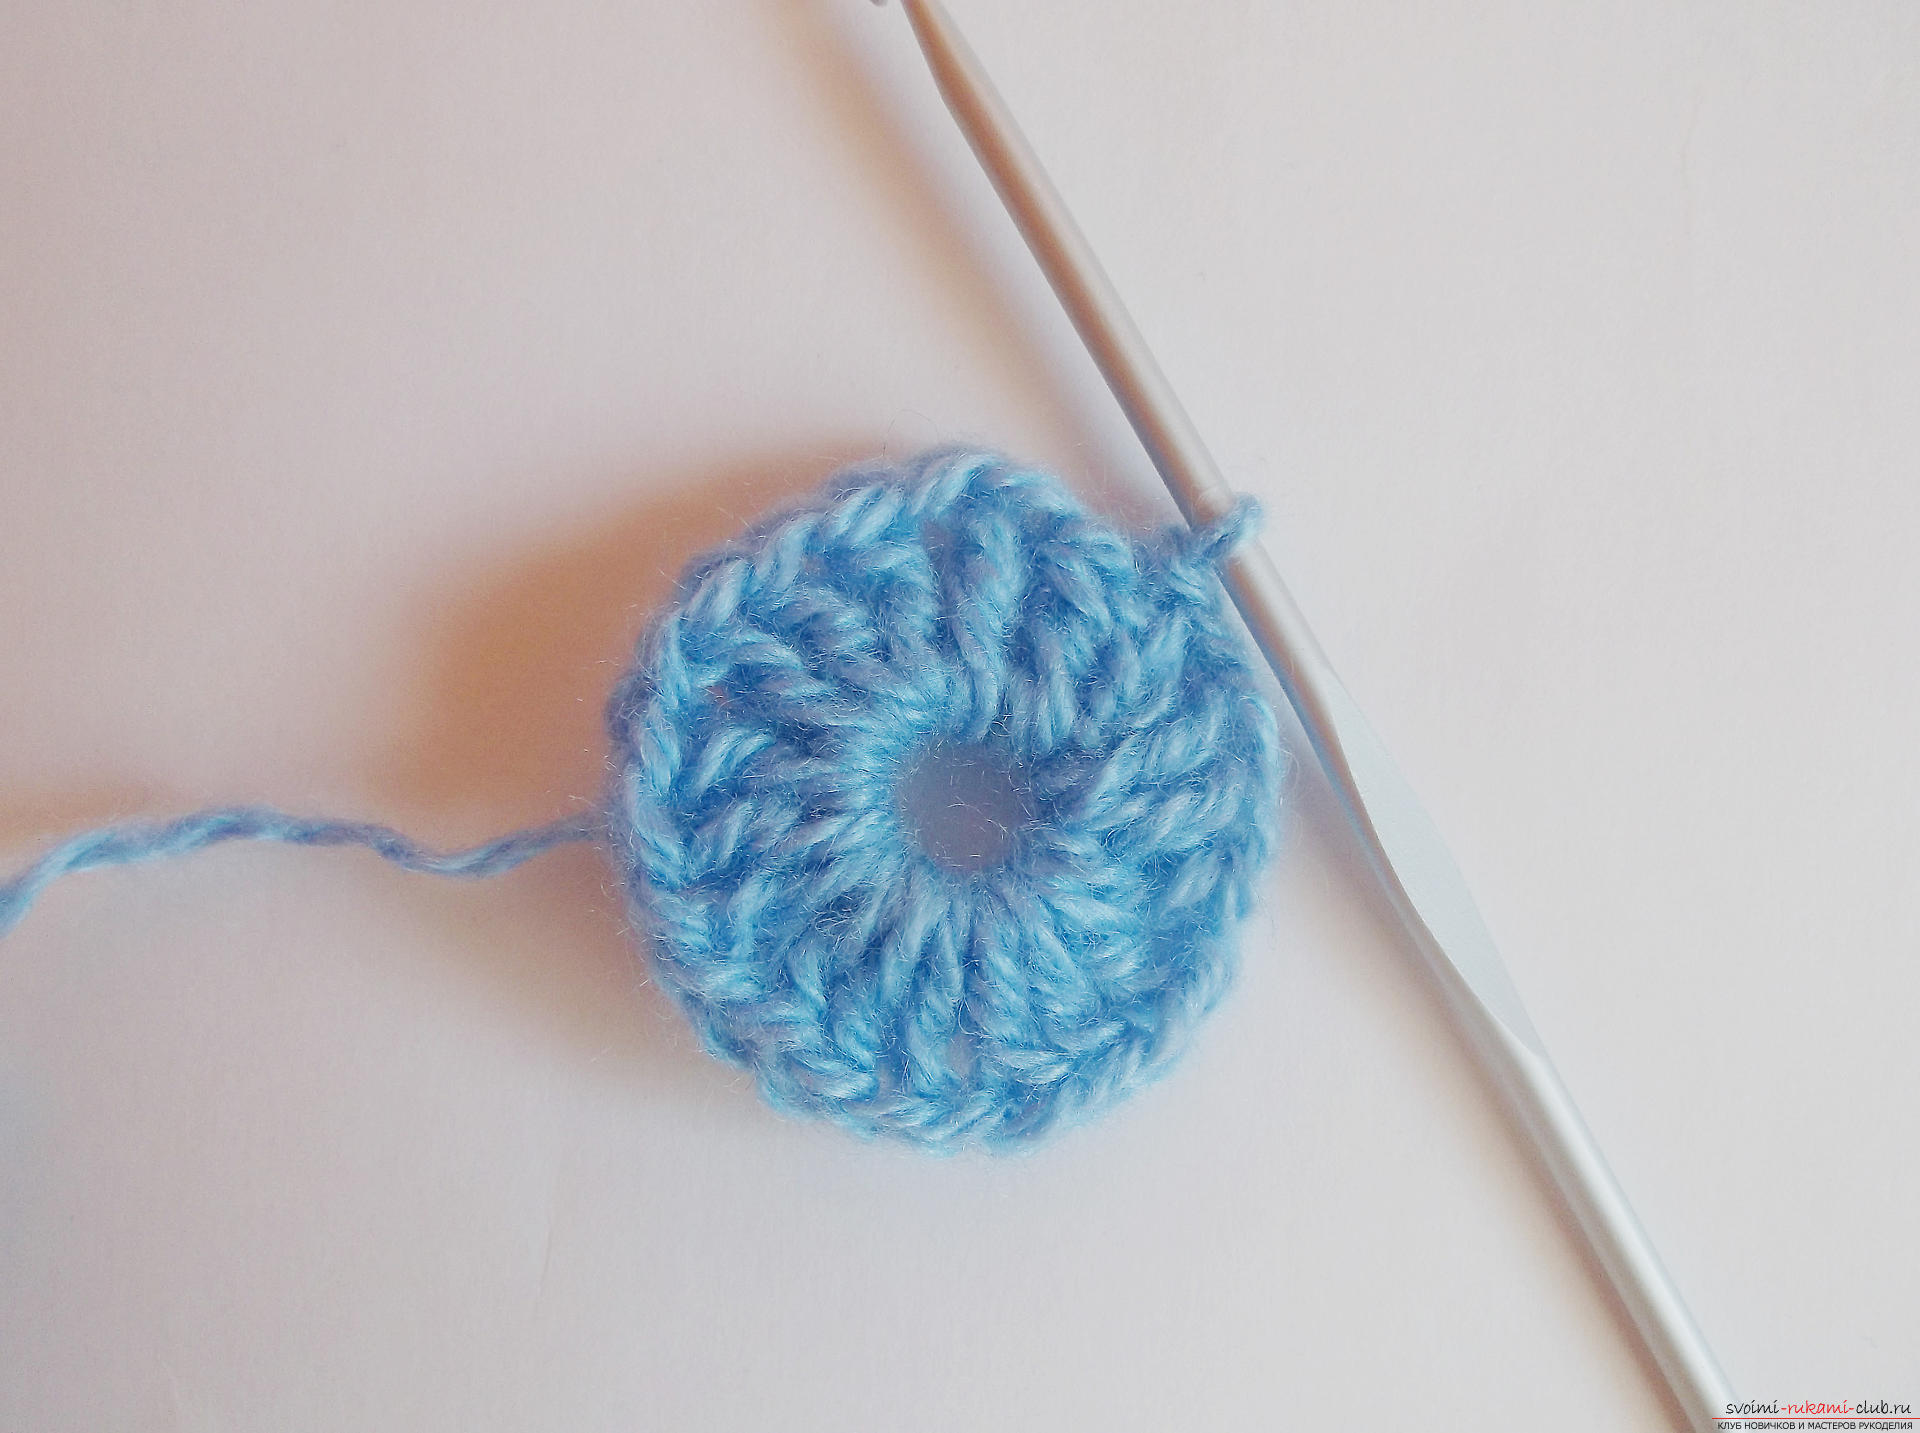 Photo to a lesson on crocheting a Christmas ball. Photo # 2